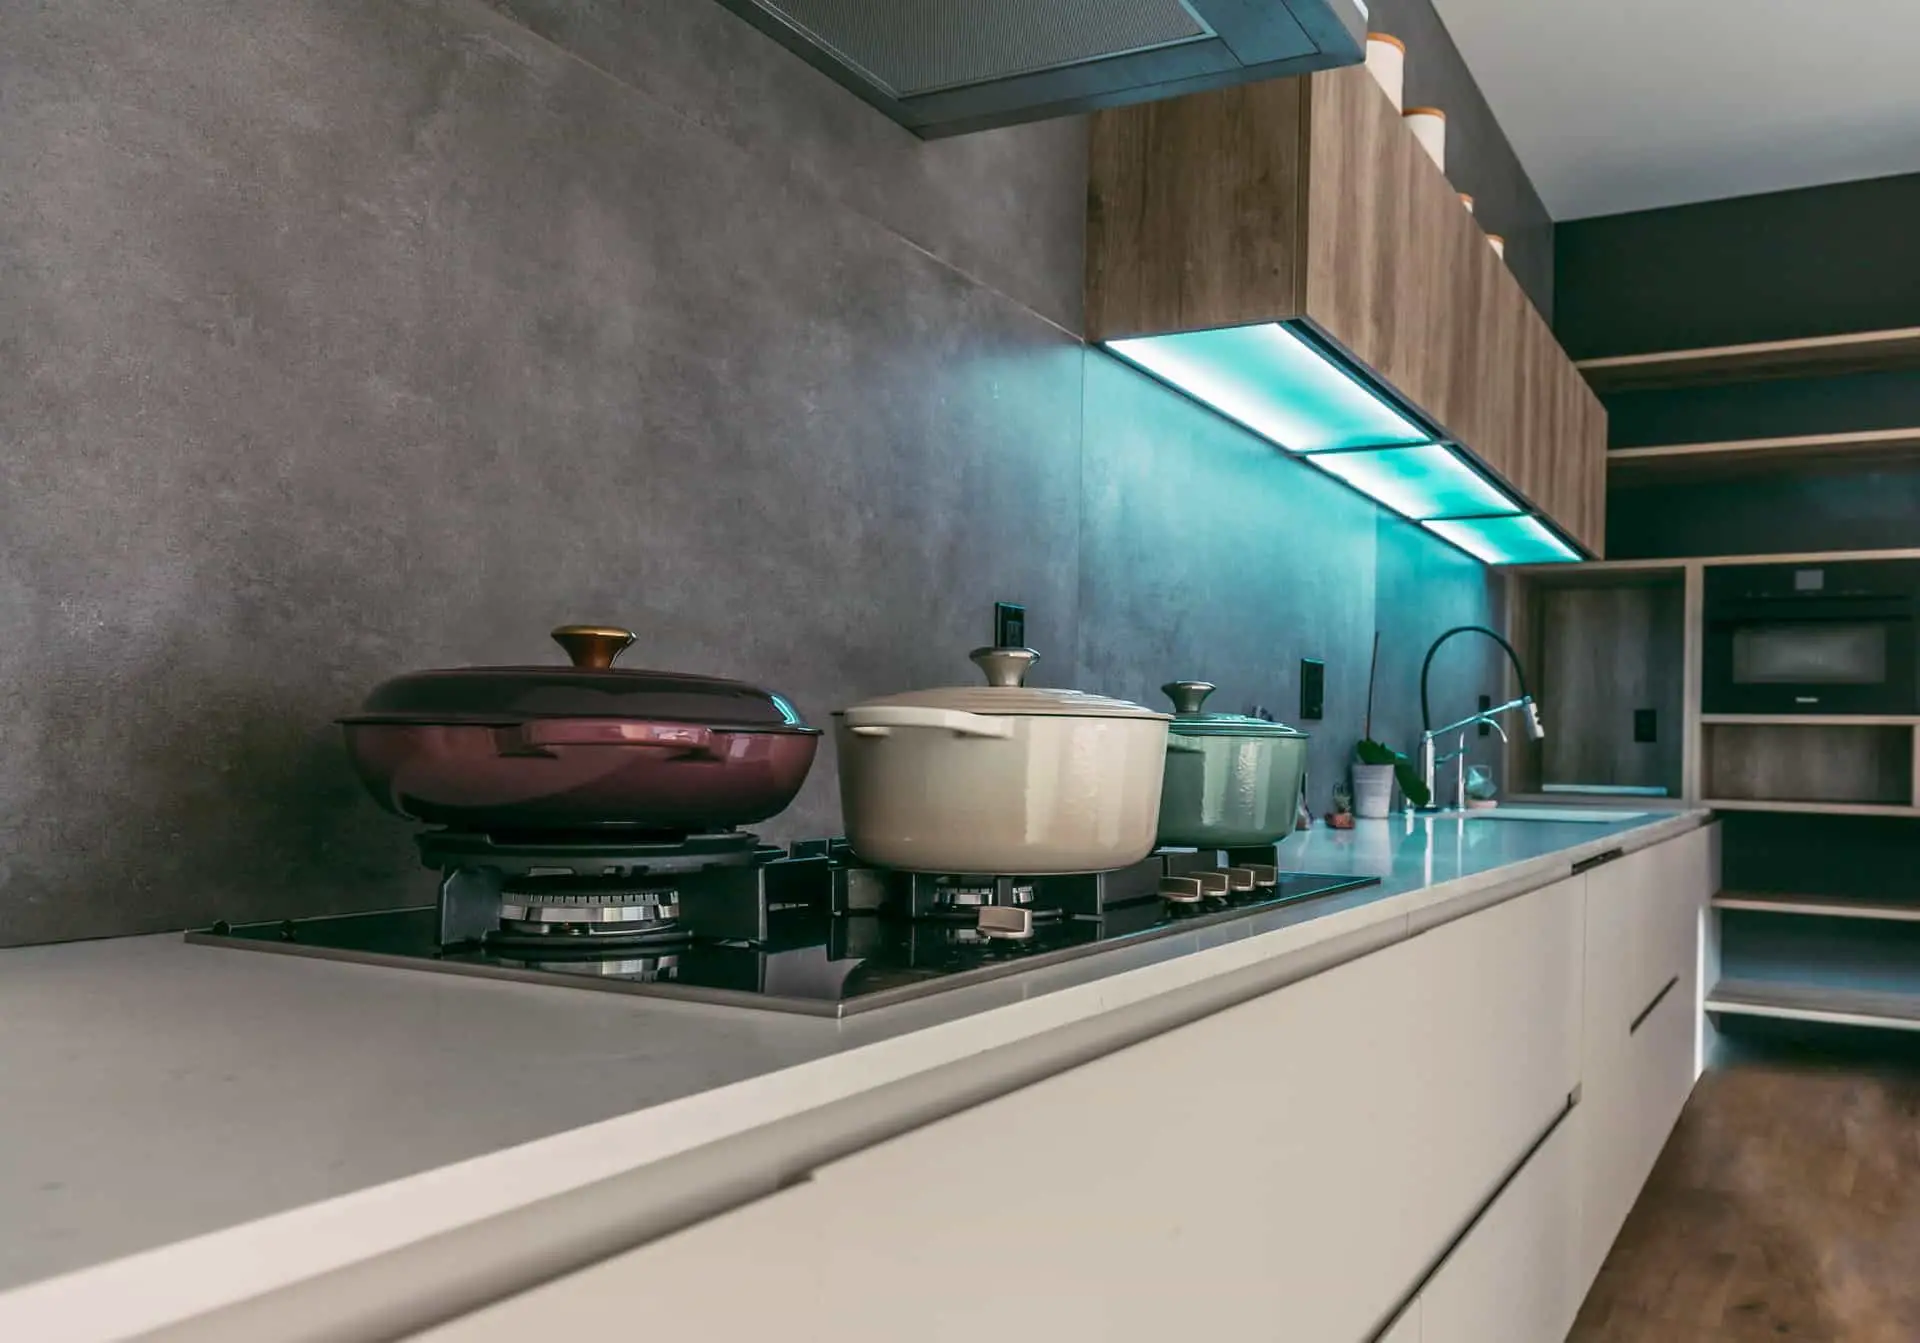 Lighting is Key in any Space contemporary kitchen ideas